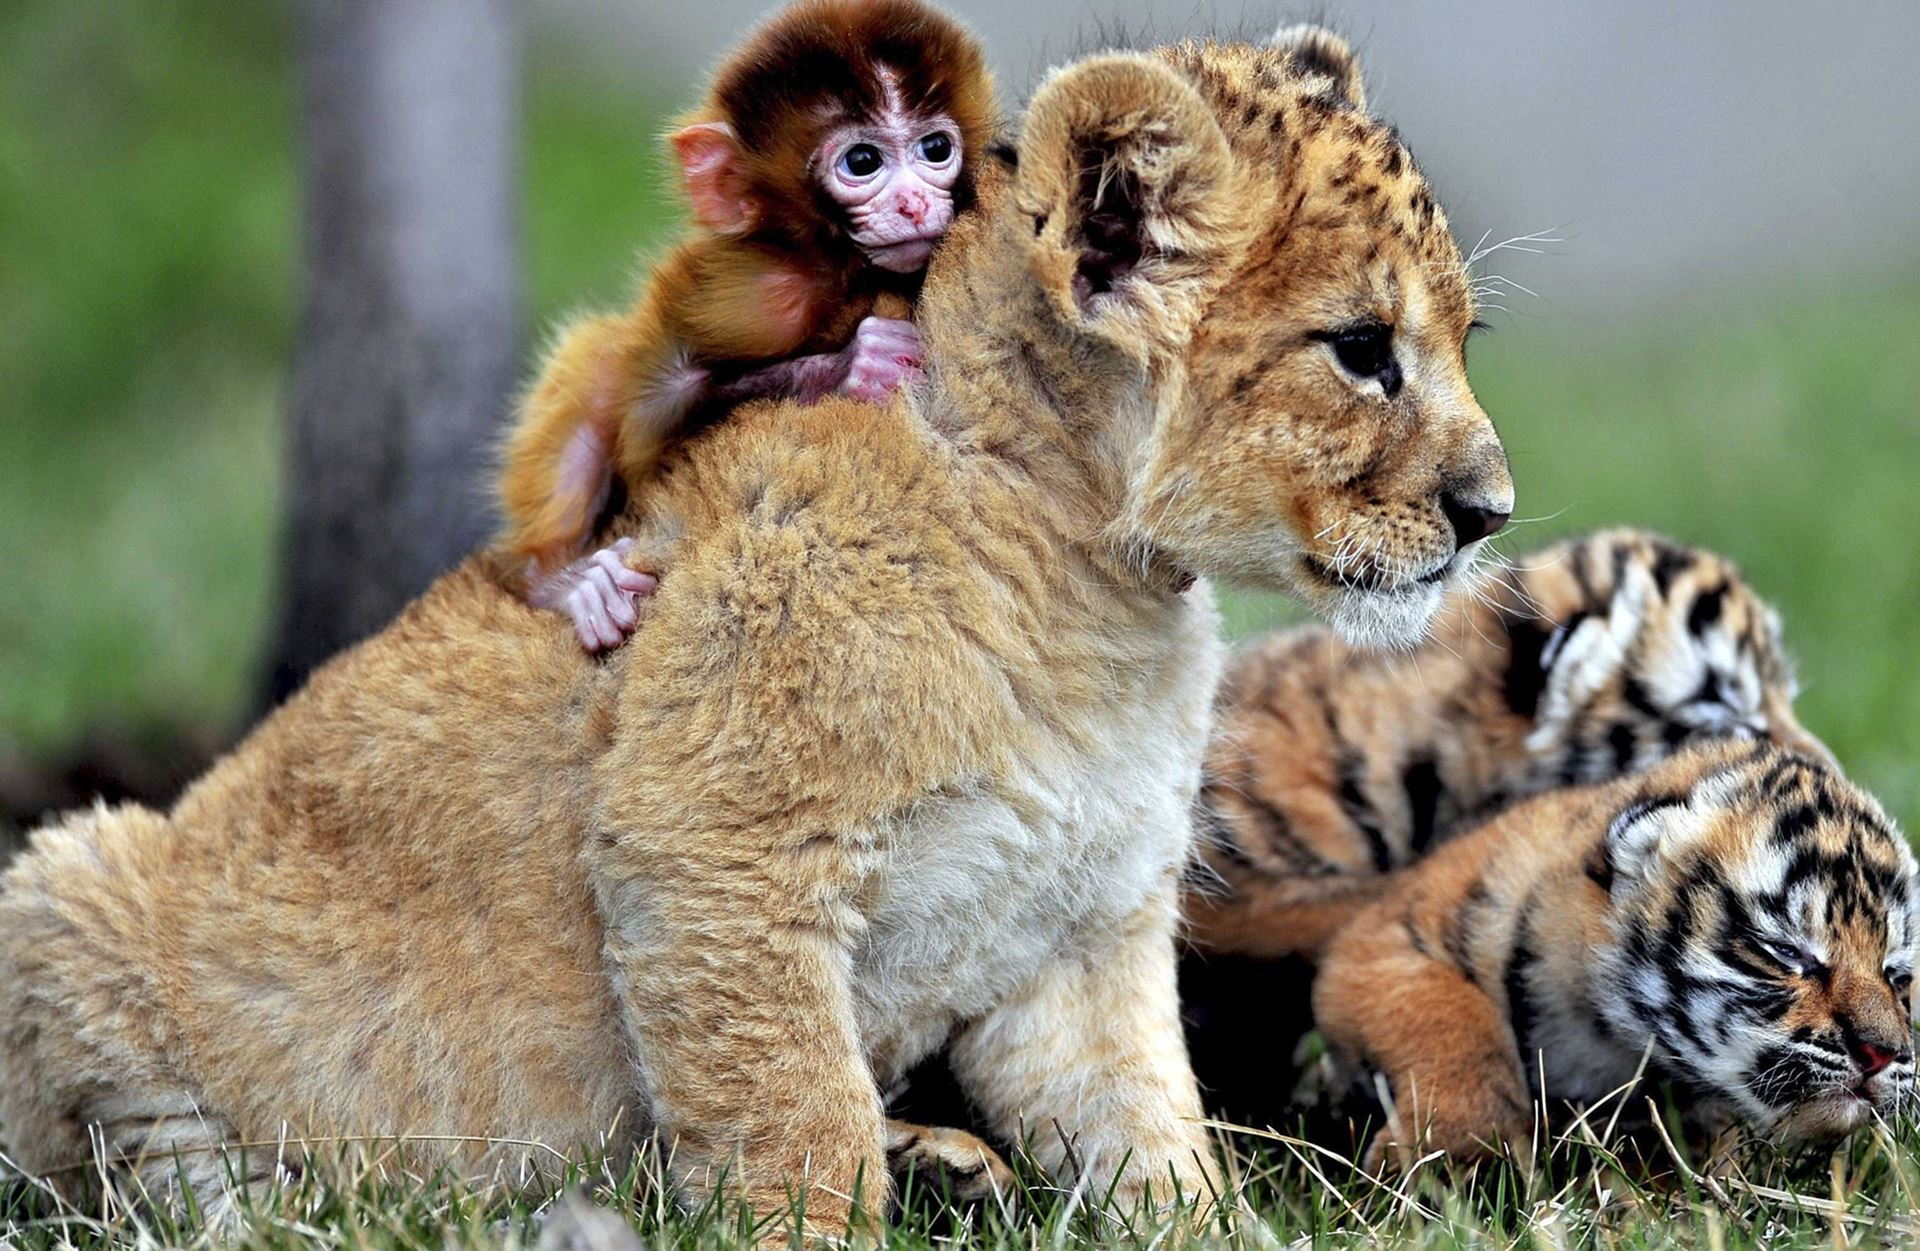 Best Friends Lion Cub And Baby Monkey Wallpaper